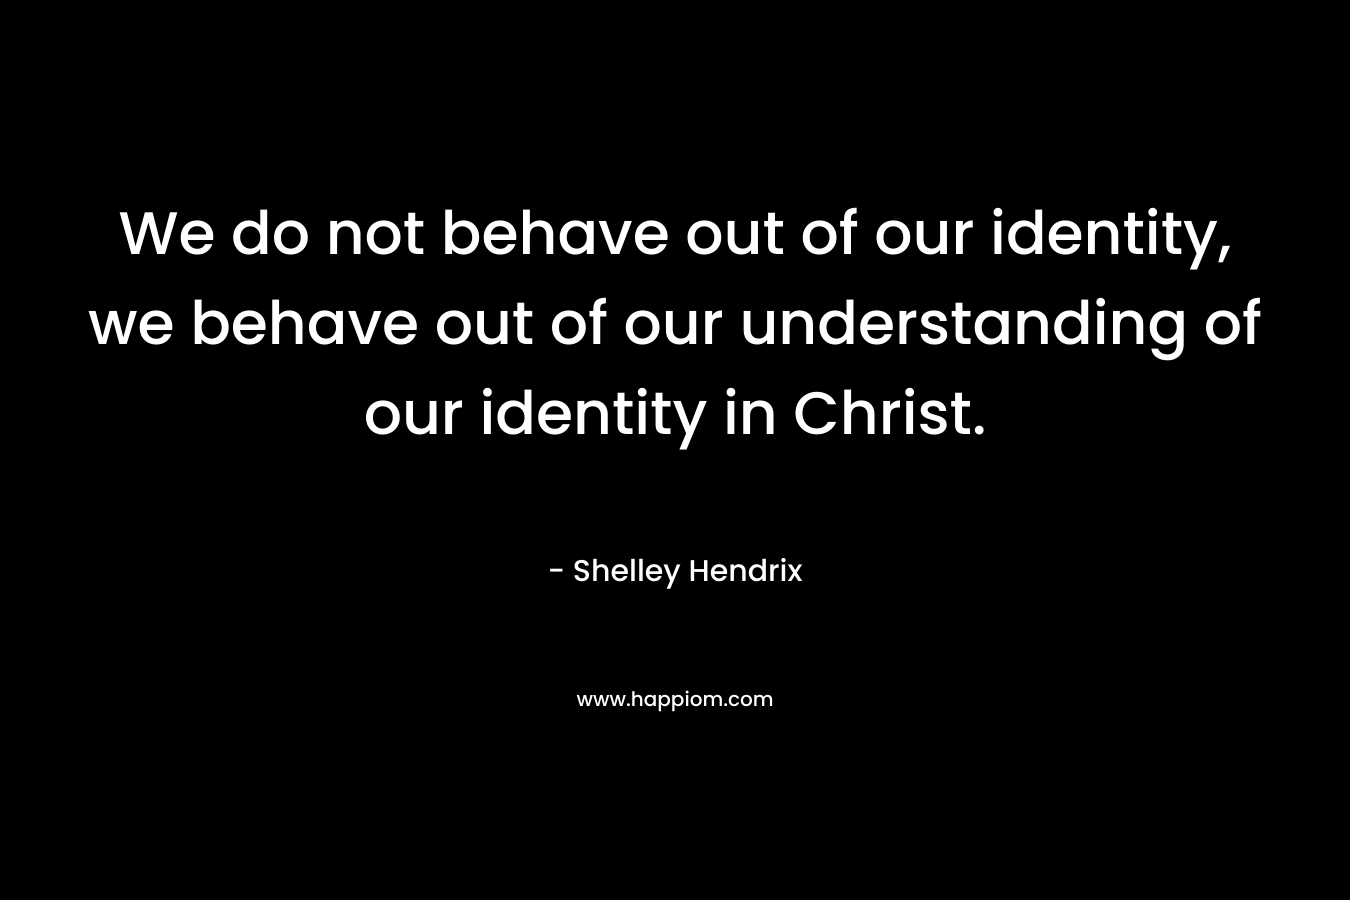 We do not behave out of our identity, we behave out of our understanding of our identity in Christ.